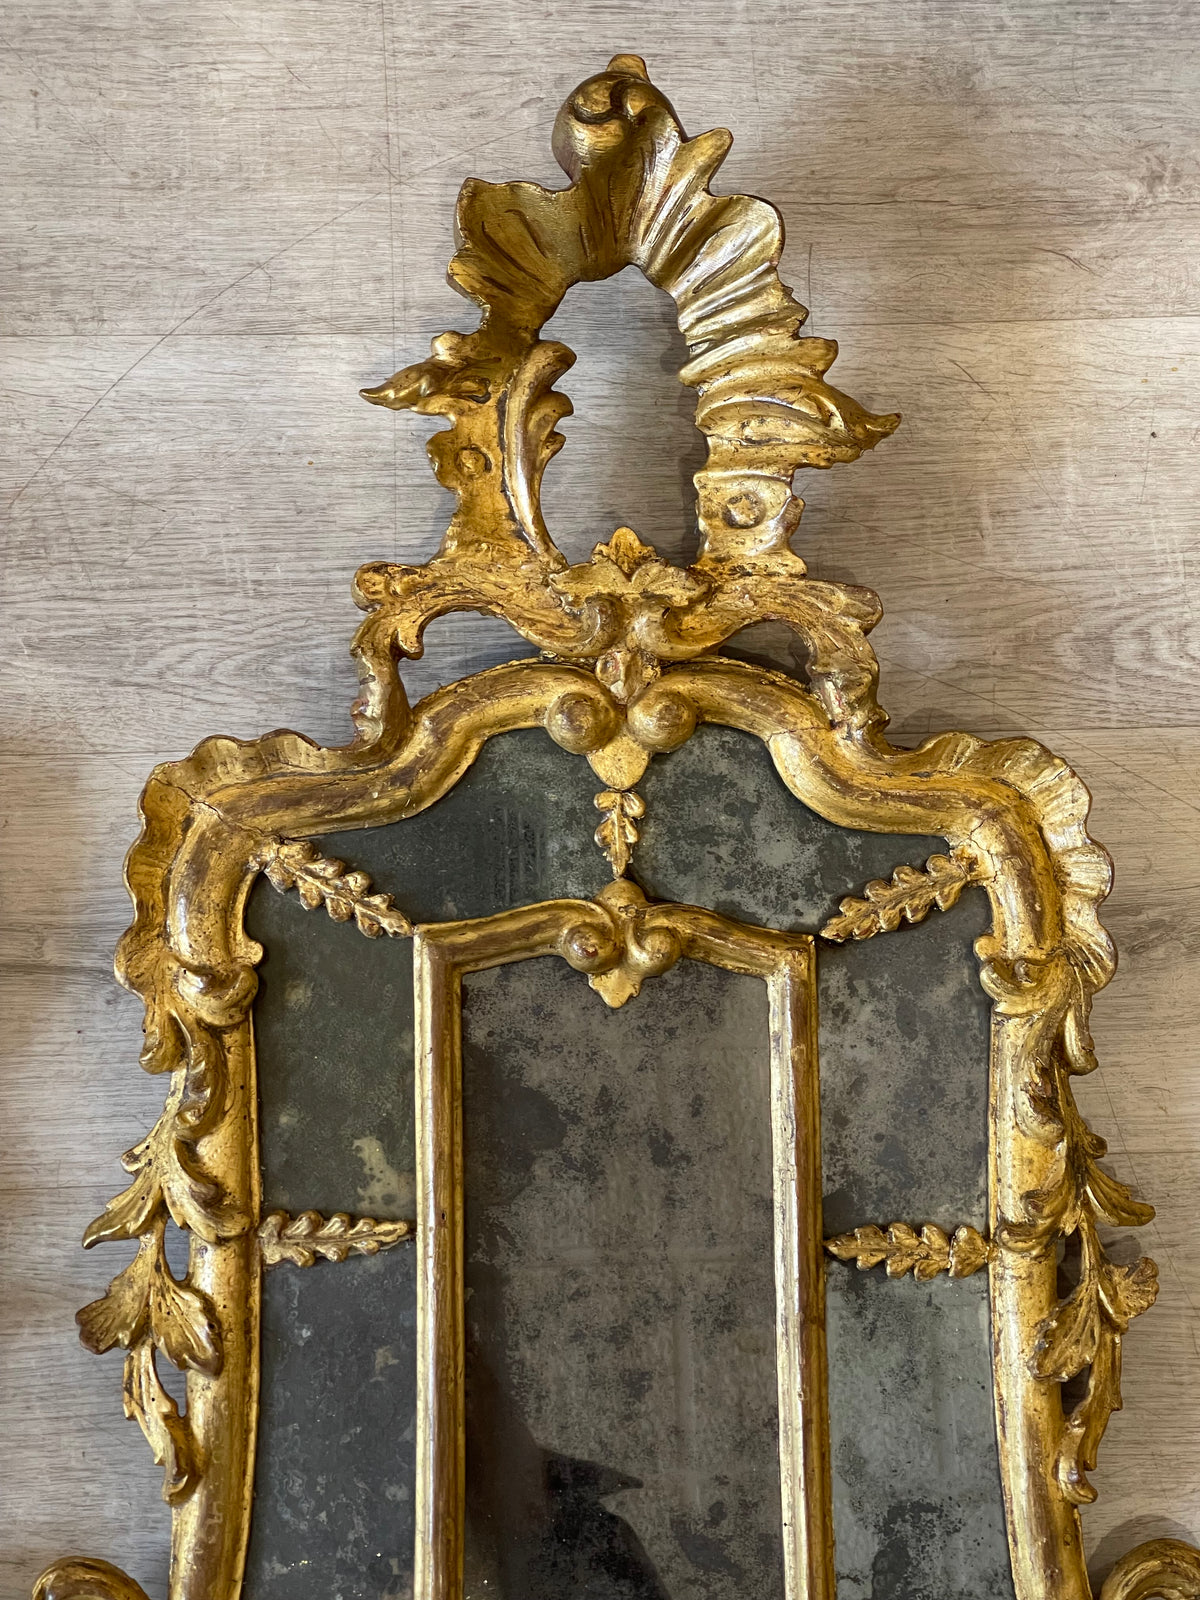 Rare Pair of Carved and Gilded Venetian Mirrors